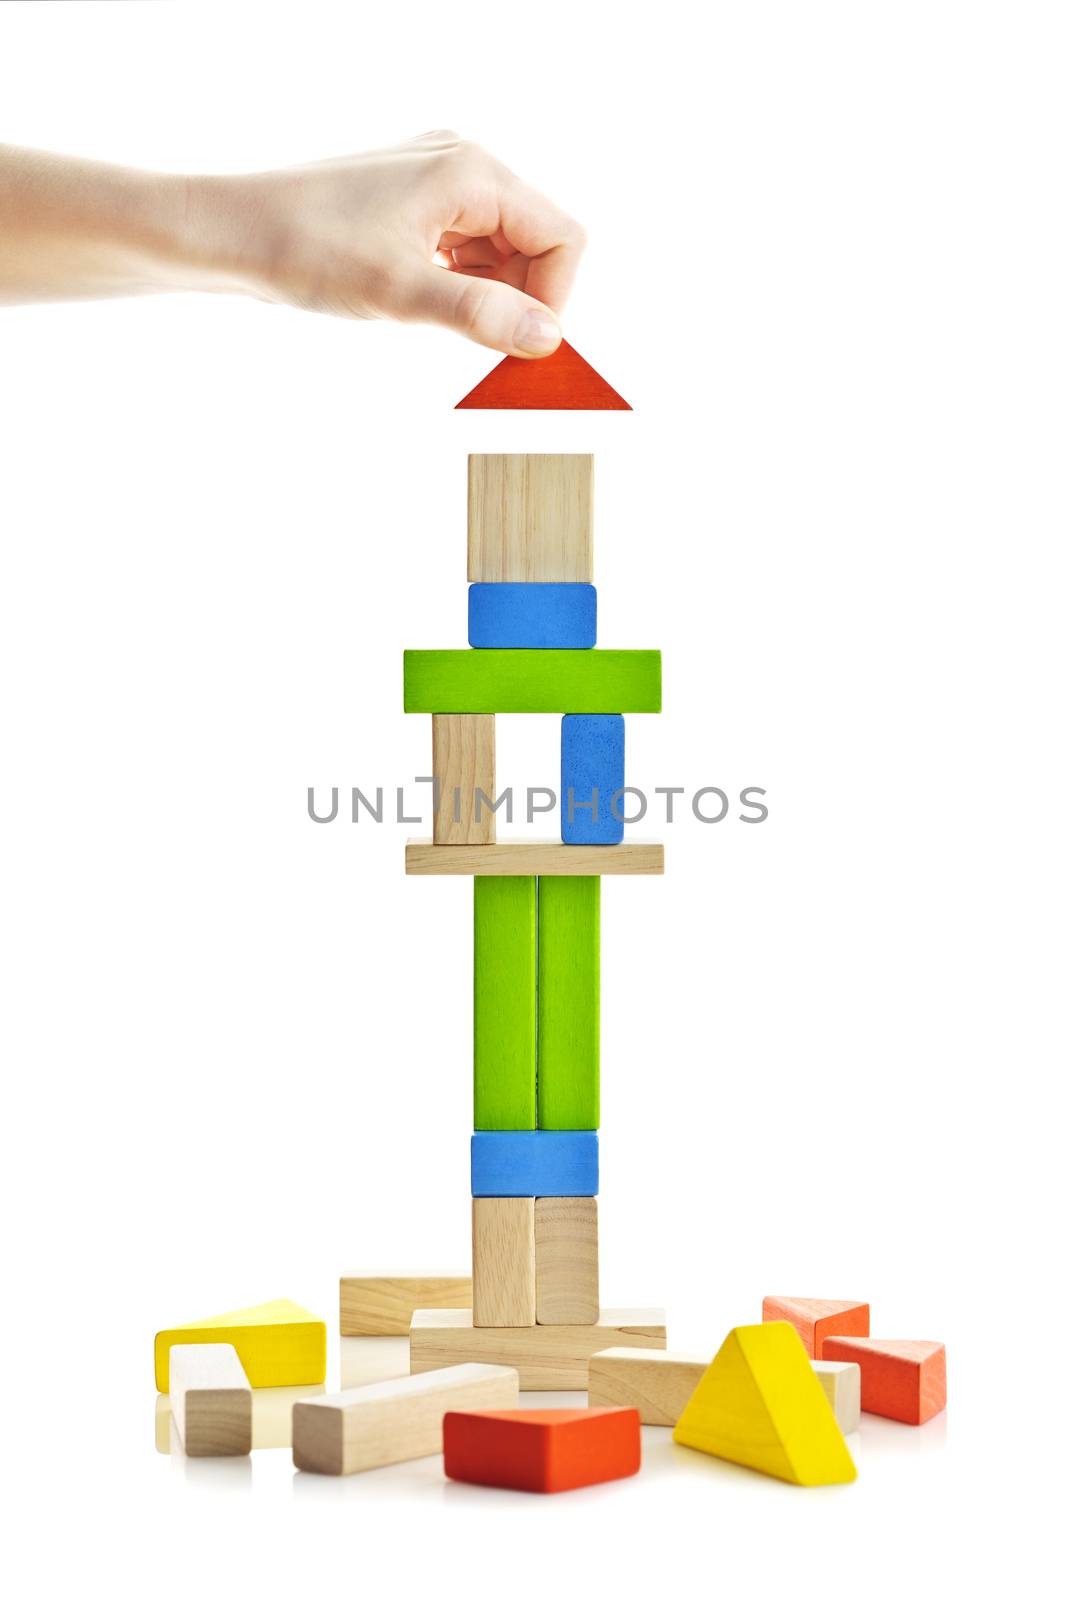 Wooden block tower under construction by elenathewise